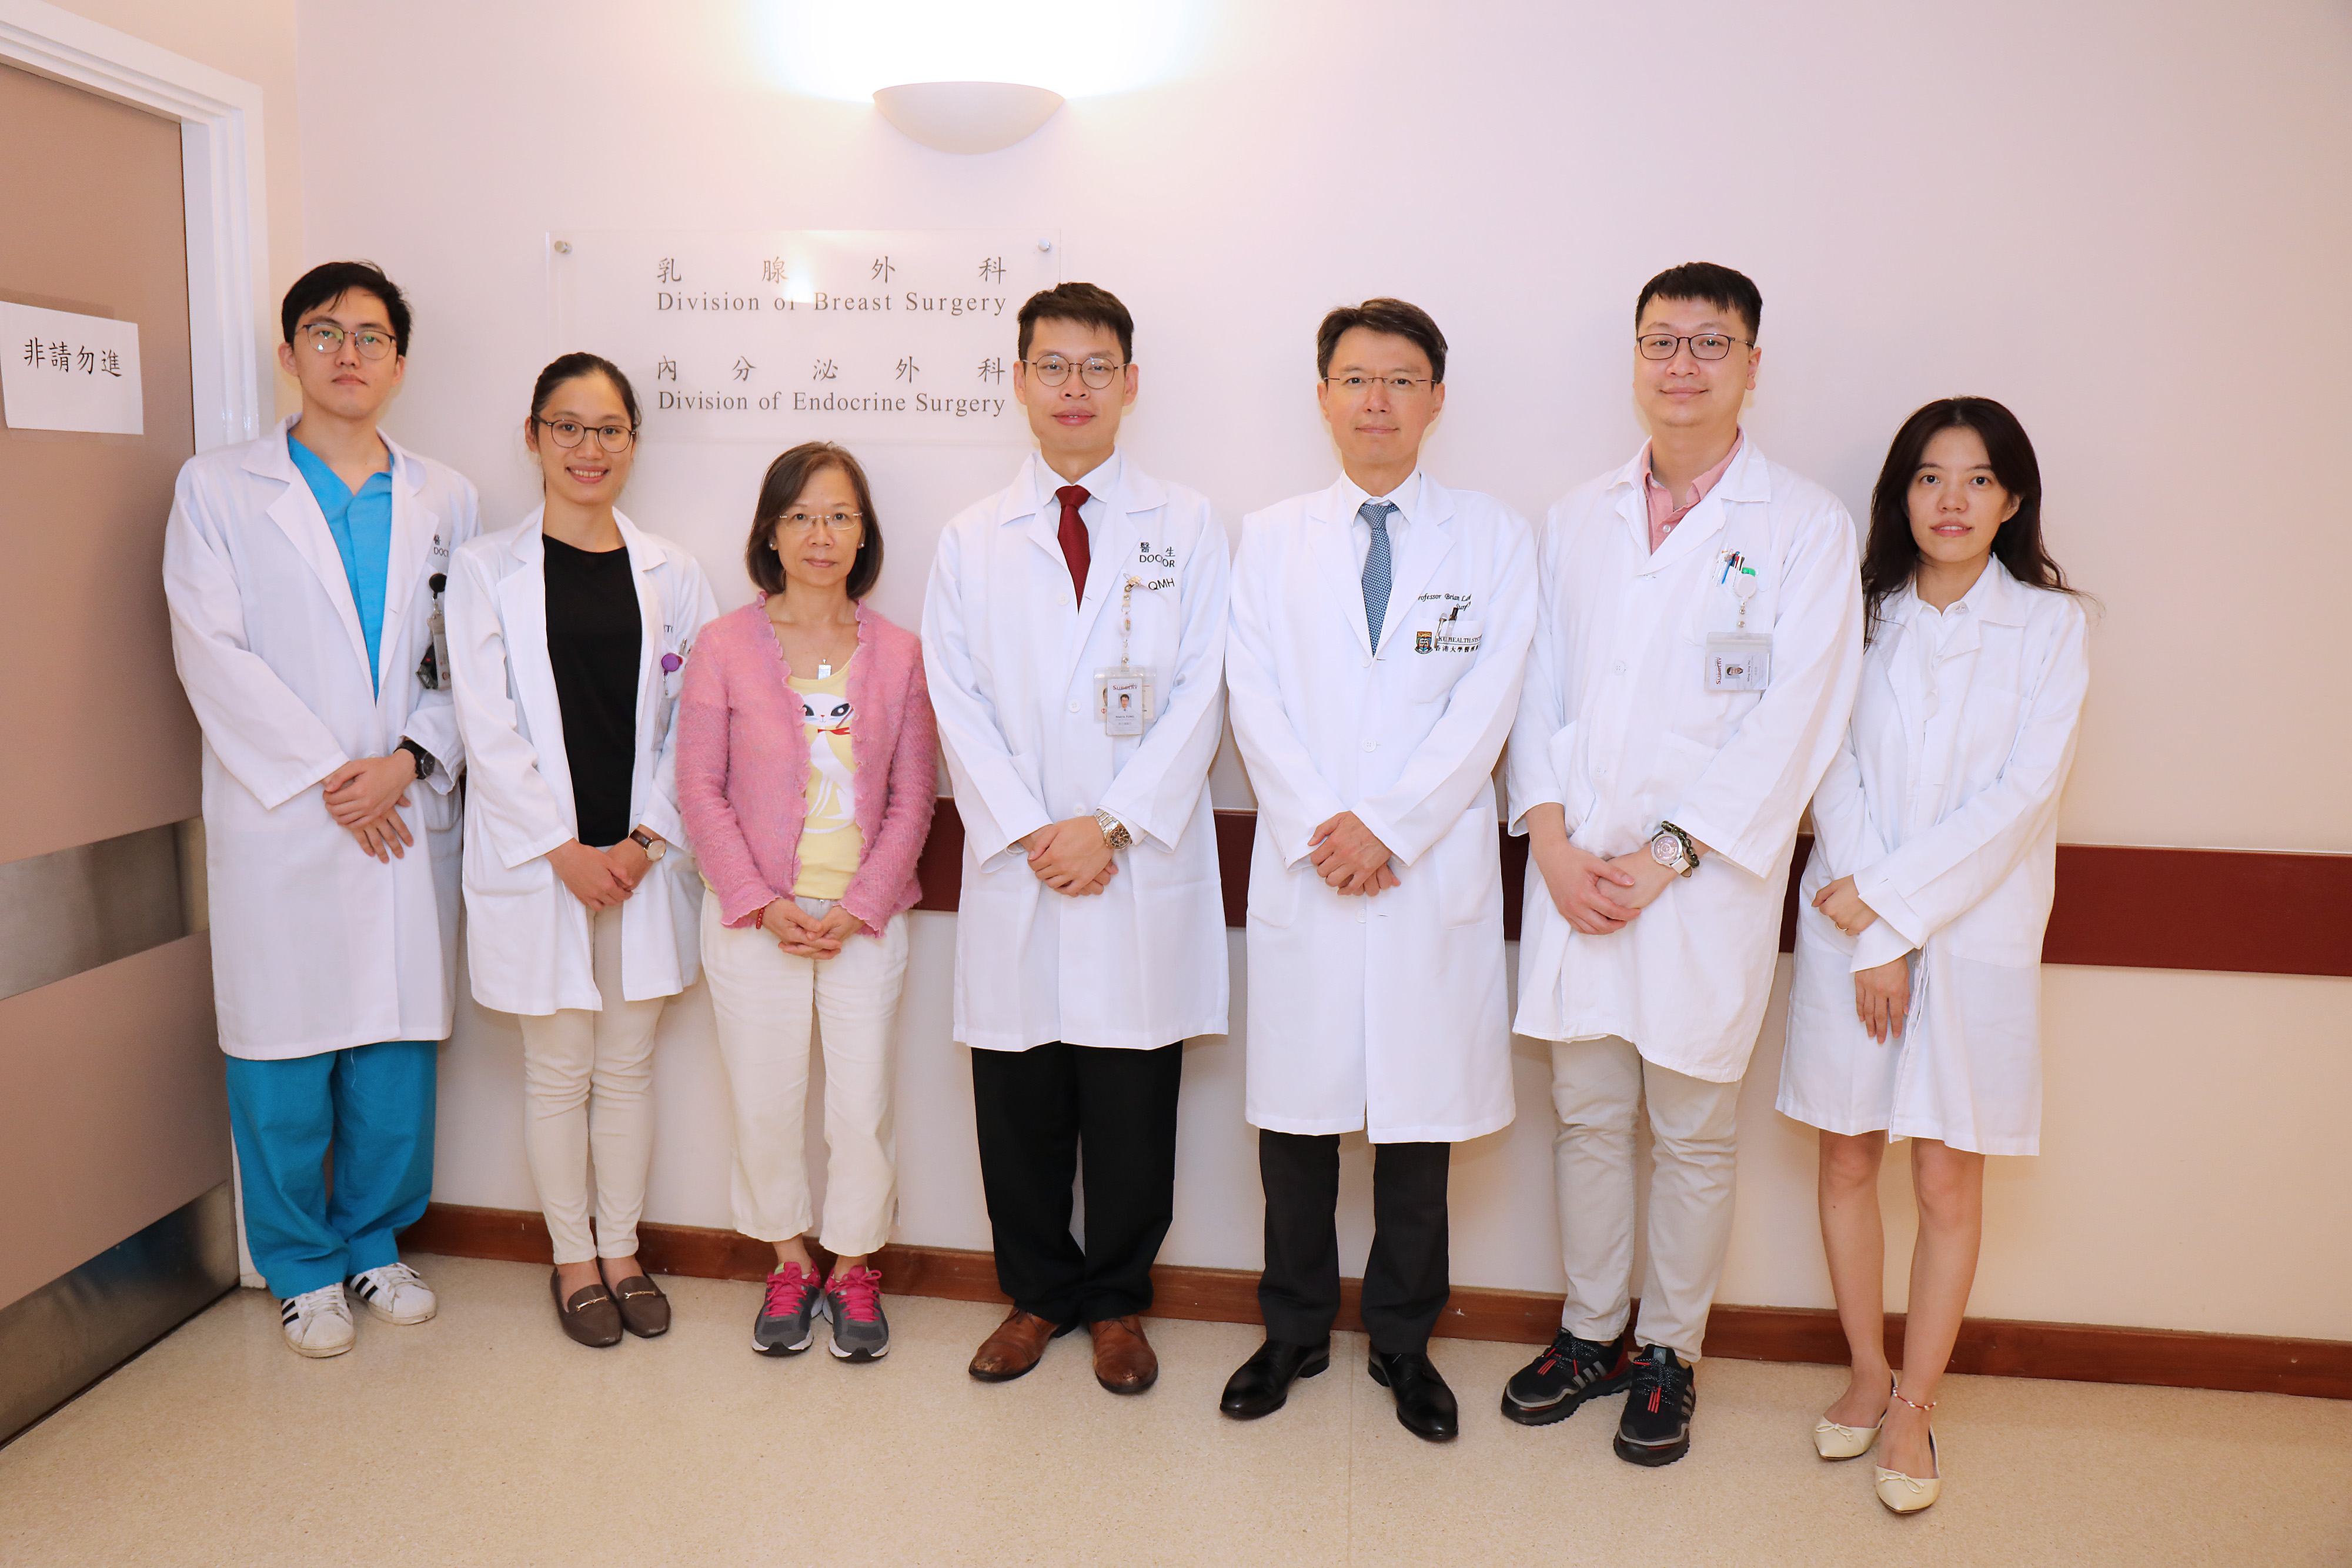 Group photo of Division of Endocrine Surgery